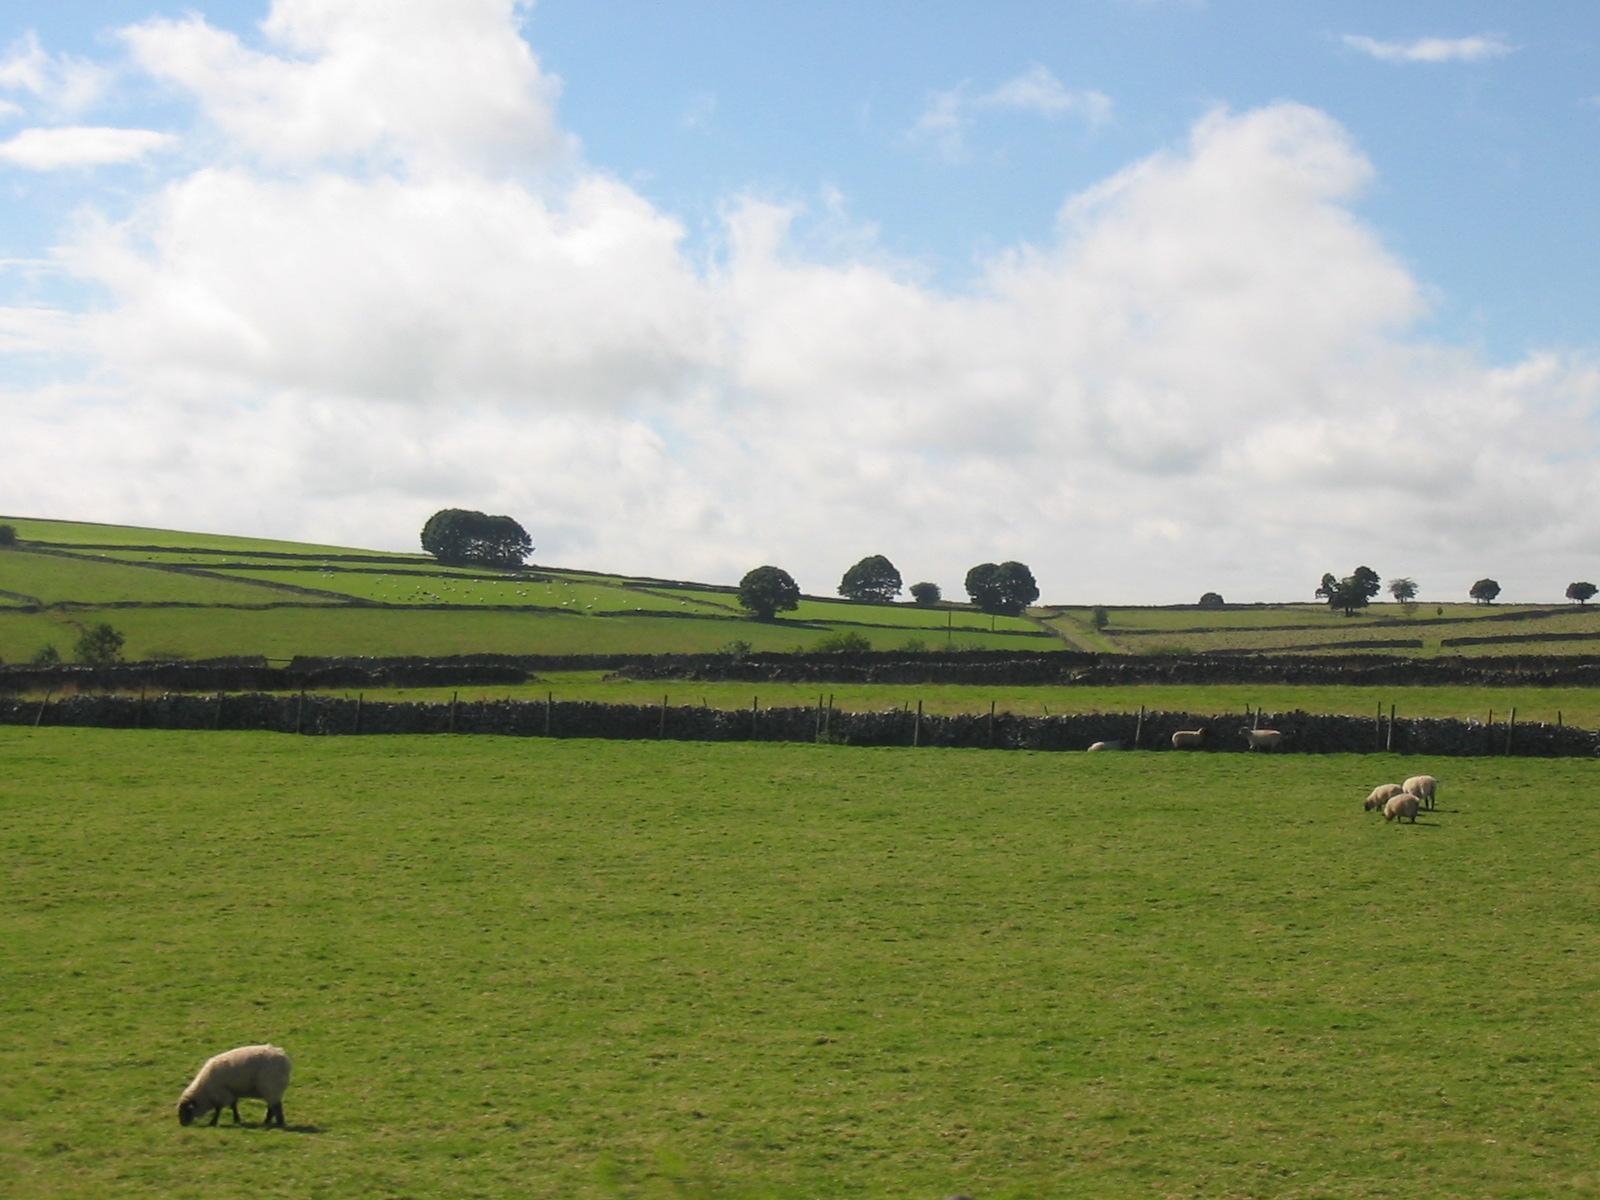 two sheep standing next to each other on a green field